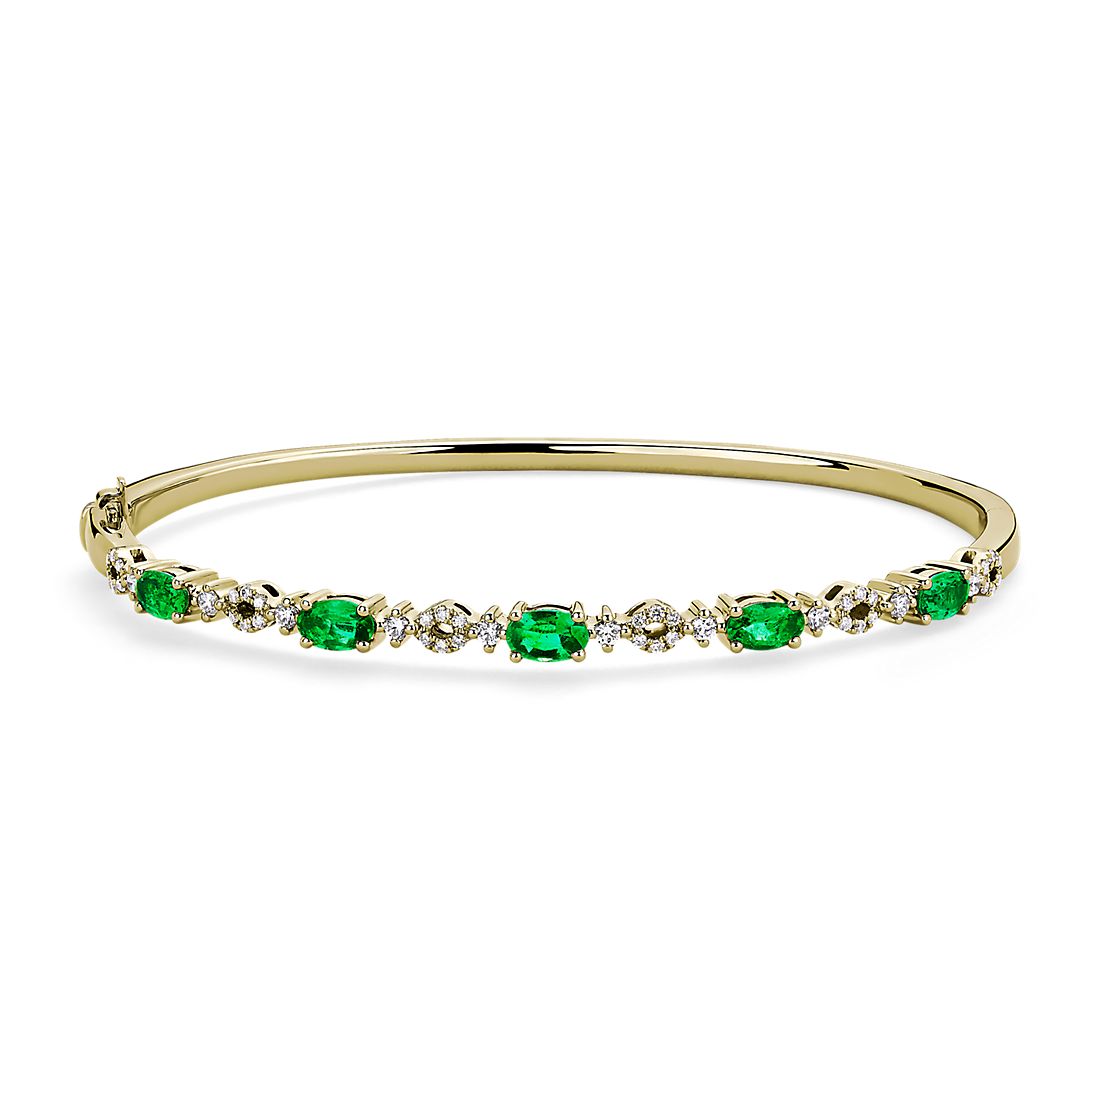 Oval Emerald Bangle 5x3mm in 14k Yellow Gold